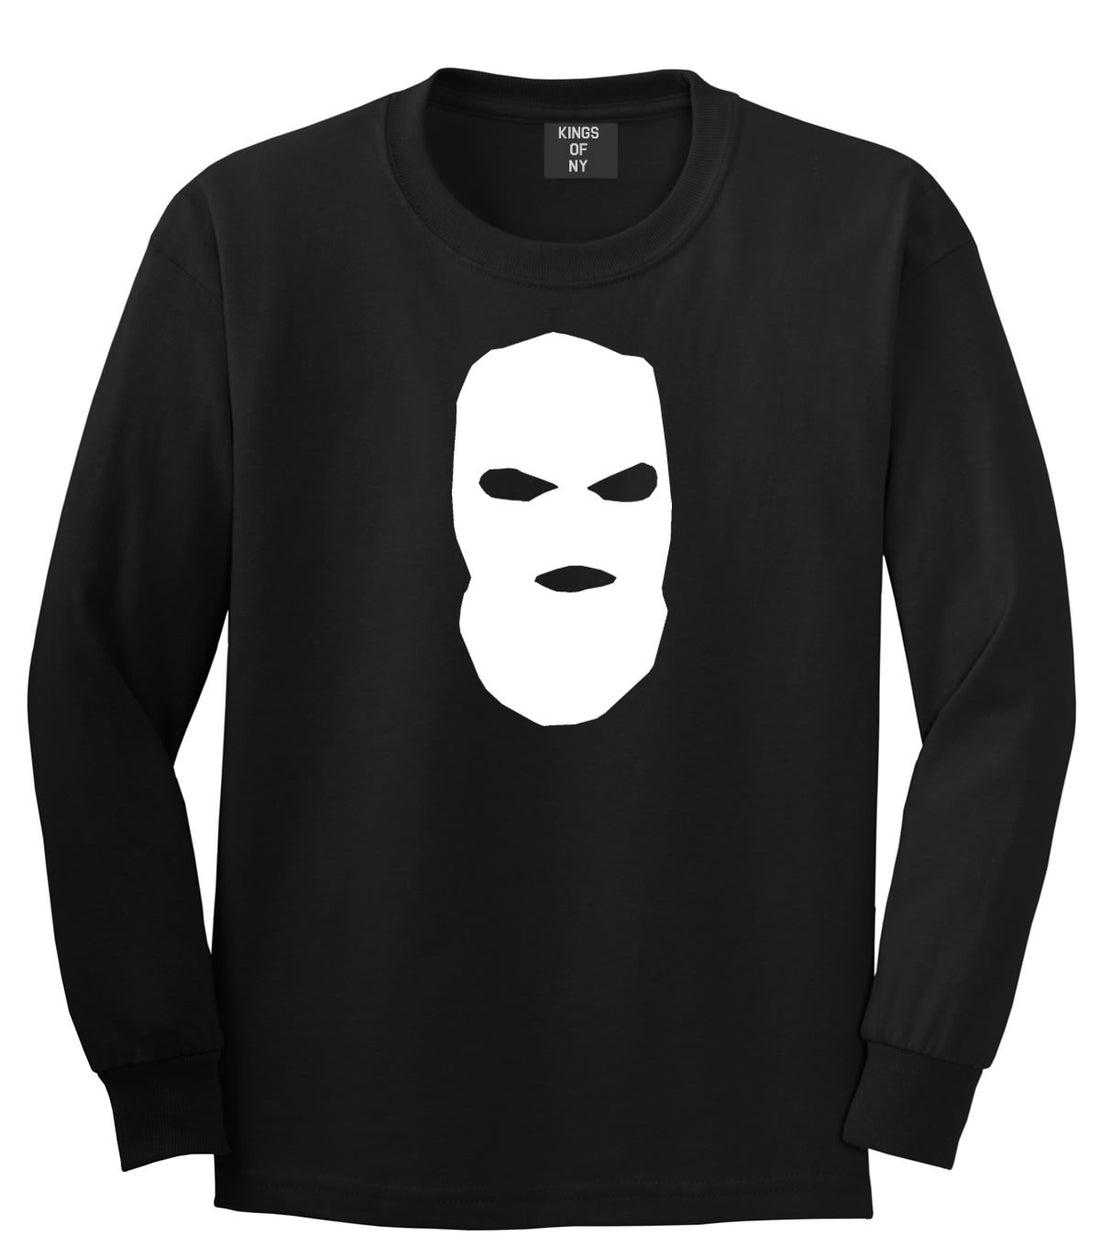 Ski Mask Way Robber Long Sleeve T-Shirt in Black By Kings Of NY